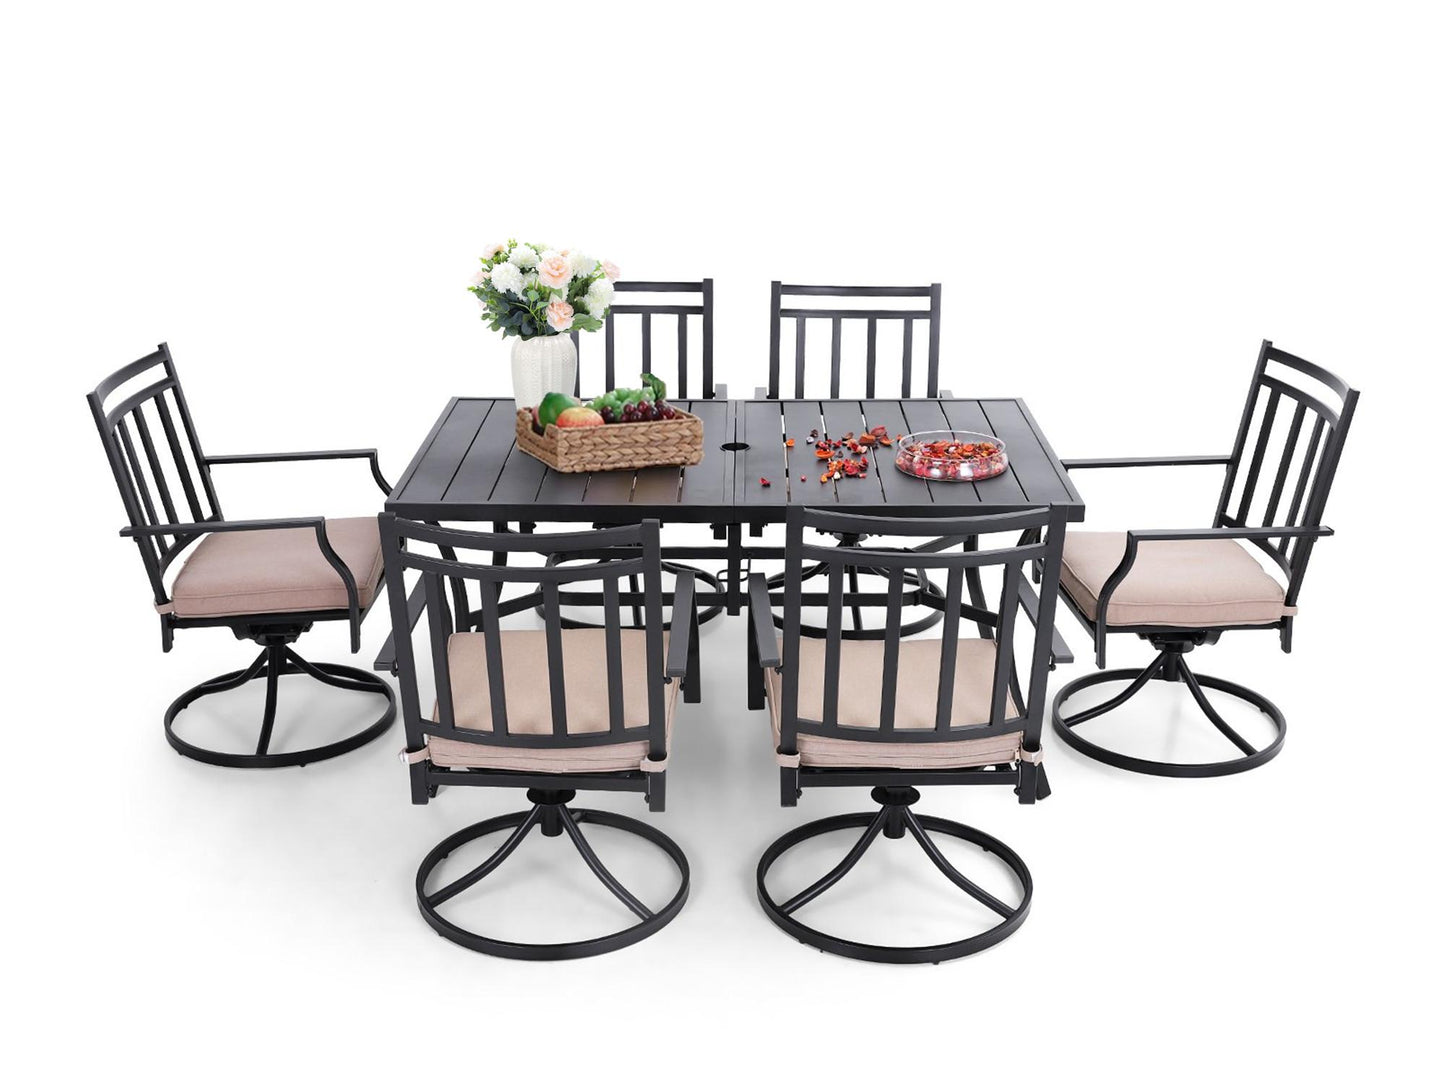 Sophia & William 7 Peices Outdoor Patio Dining Set Swivel Chairs and Table Set